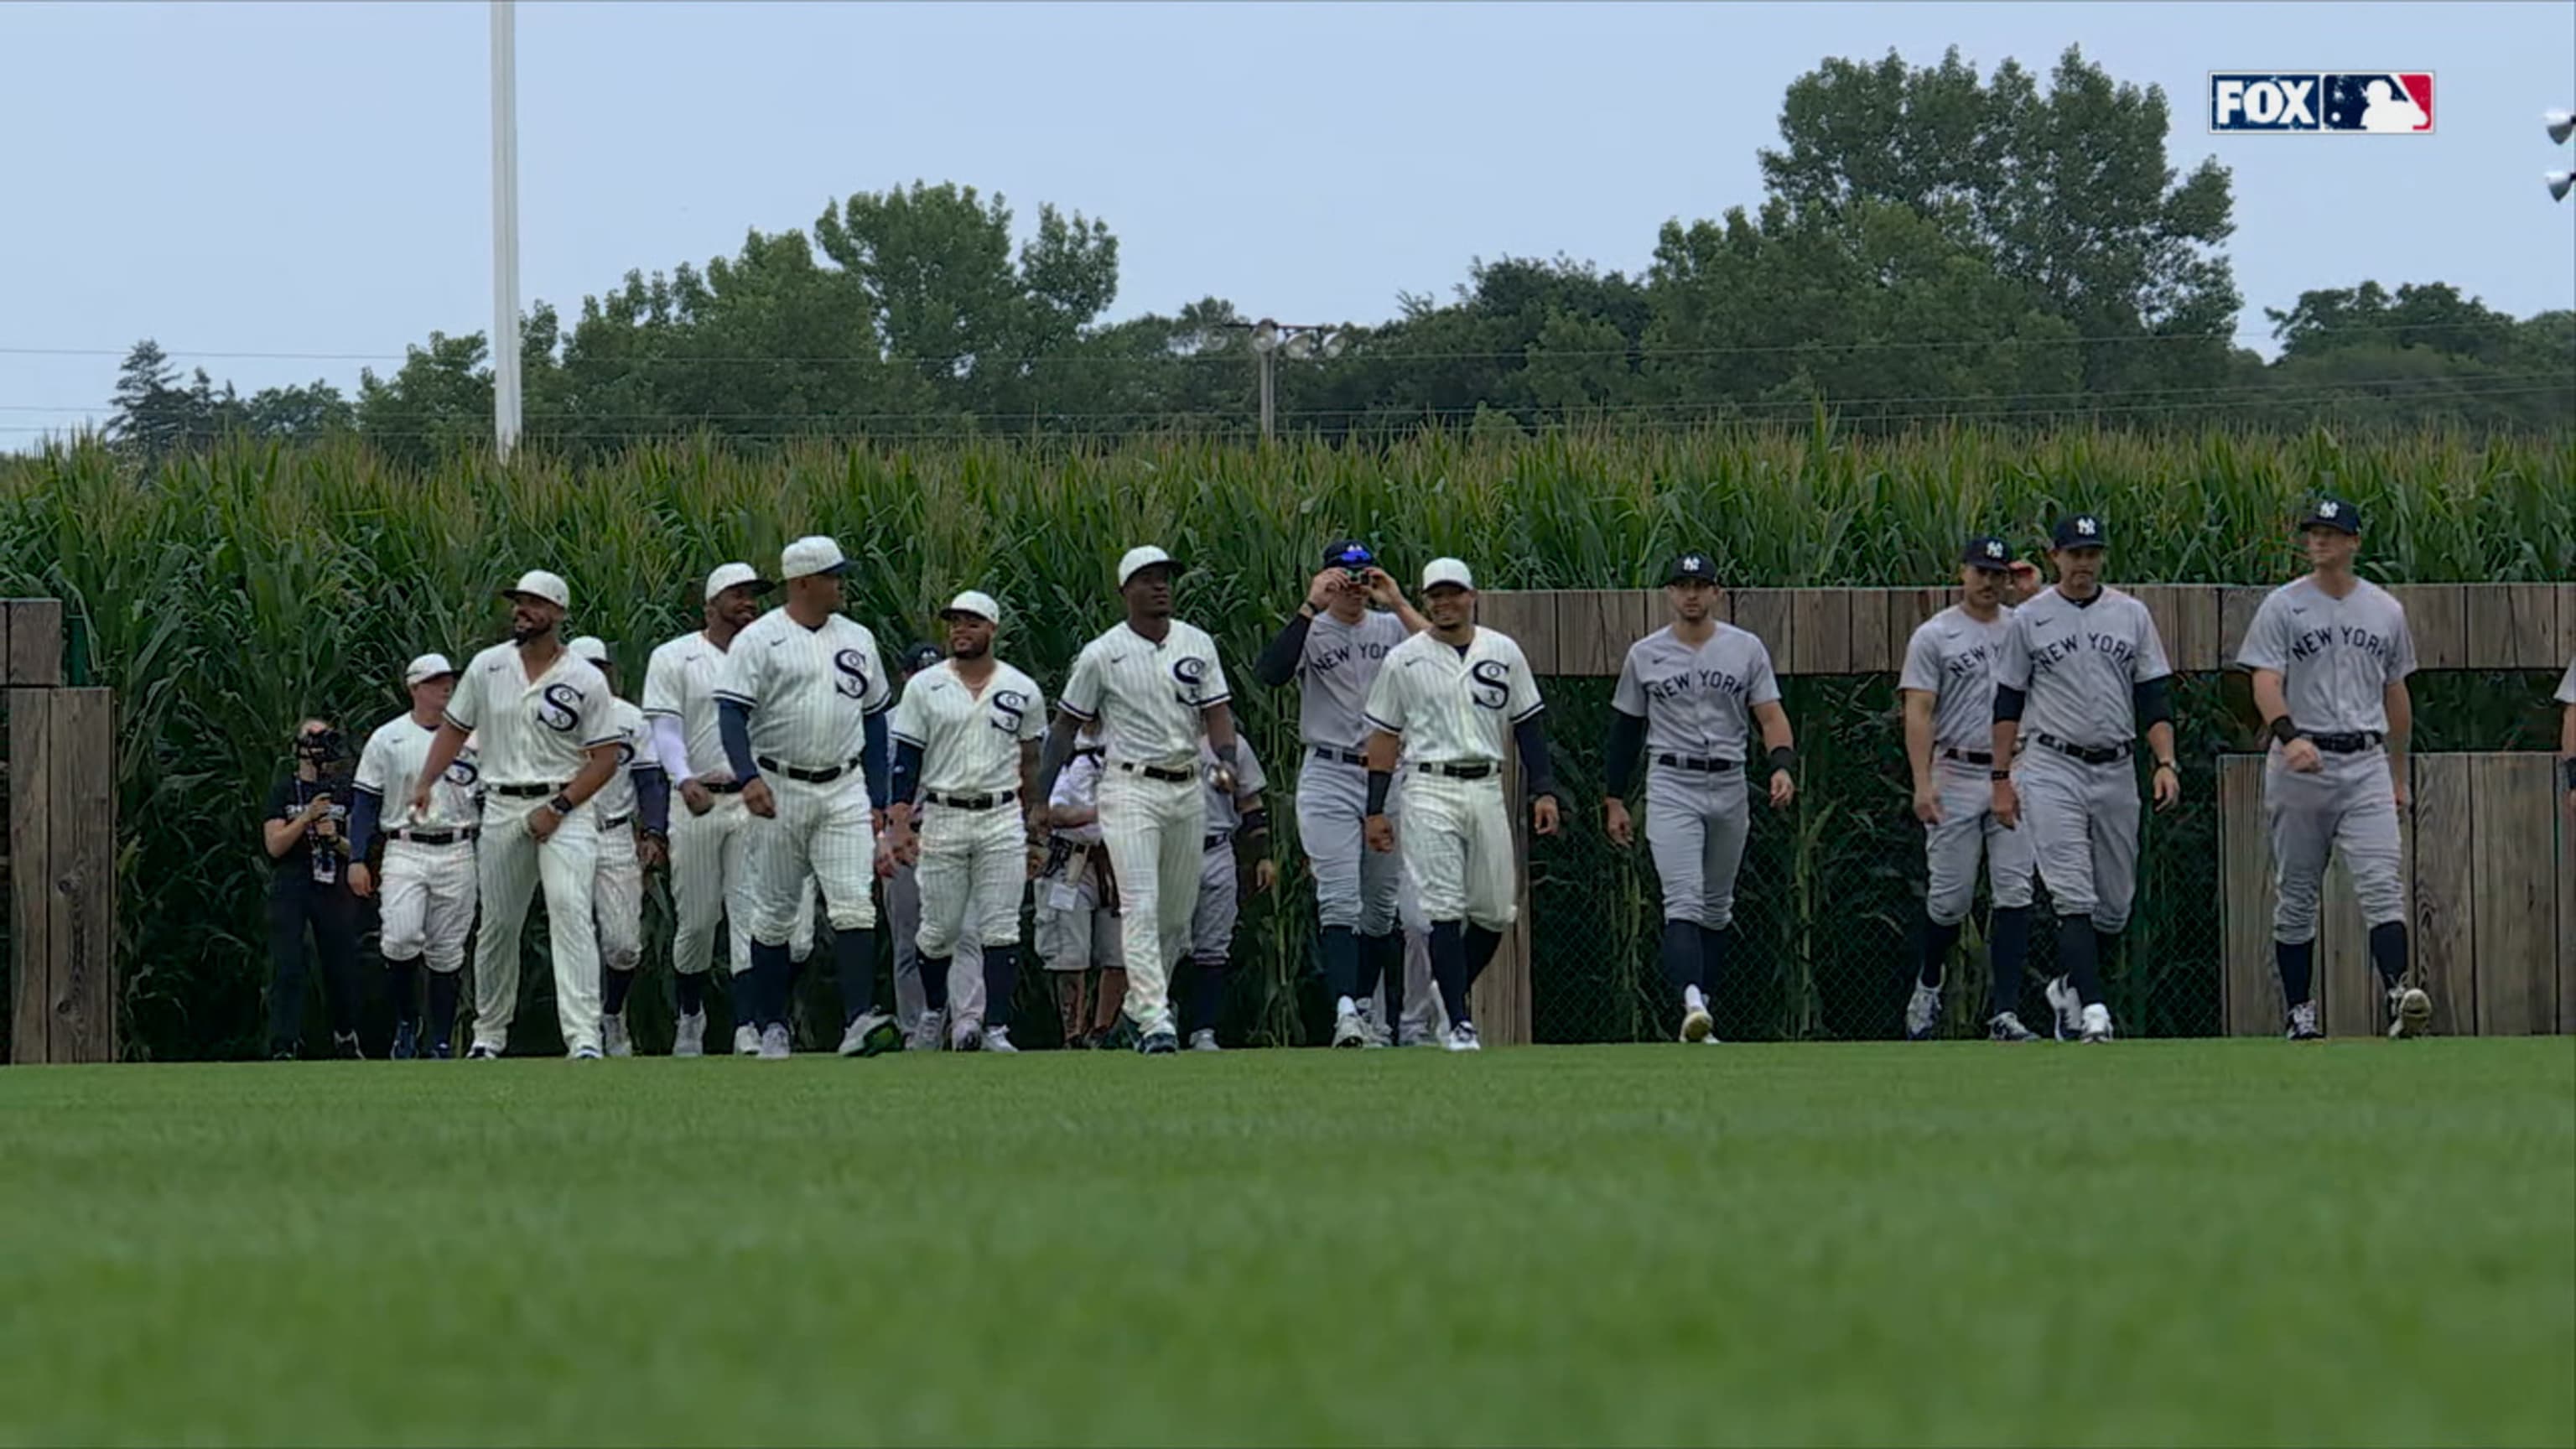 Field of Dreams MLB game from 2021